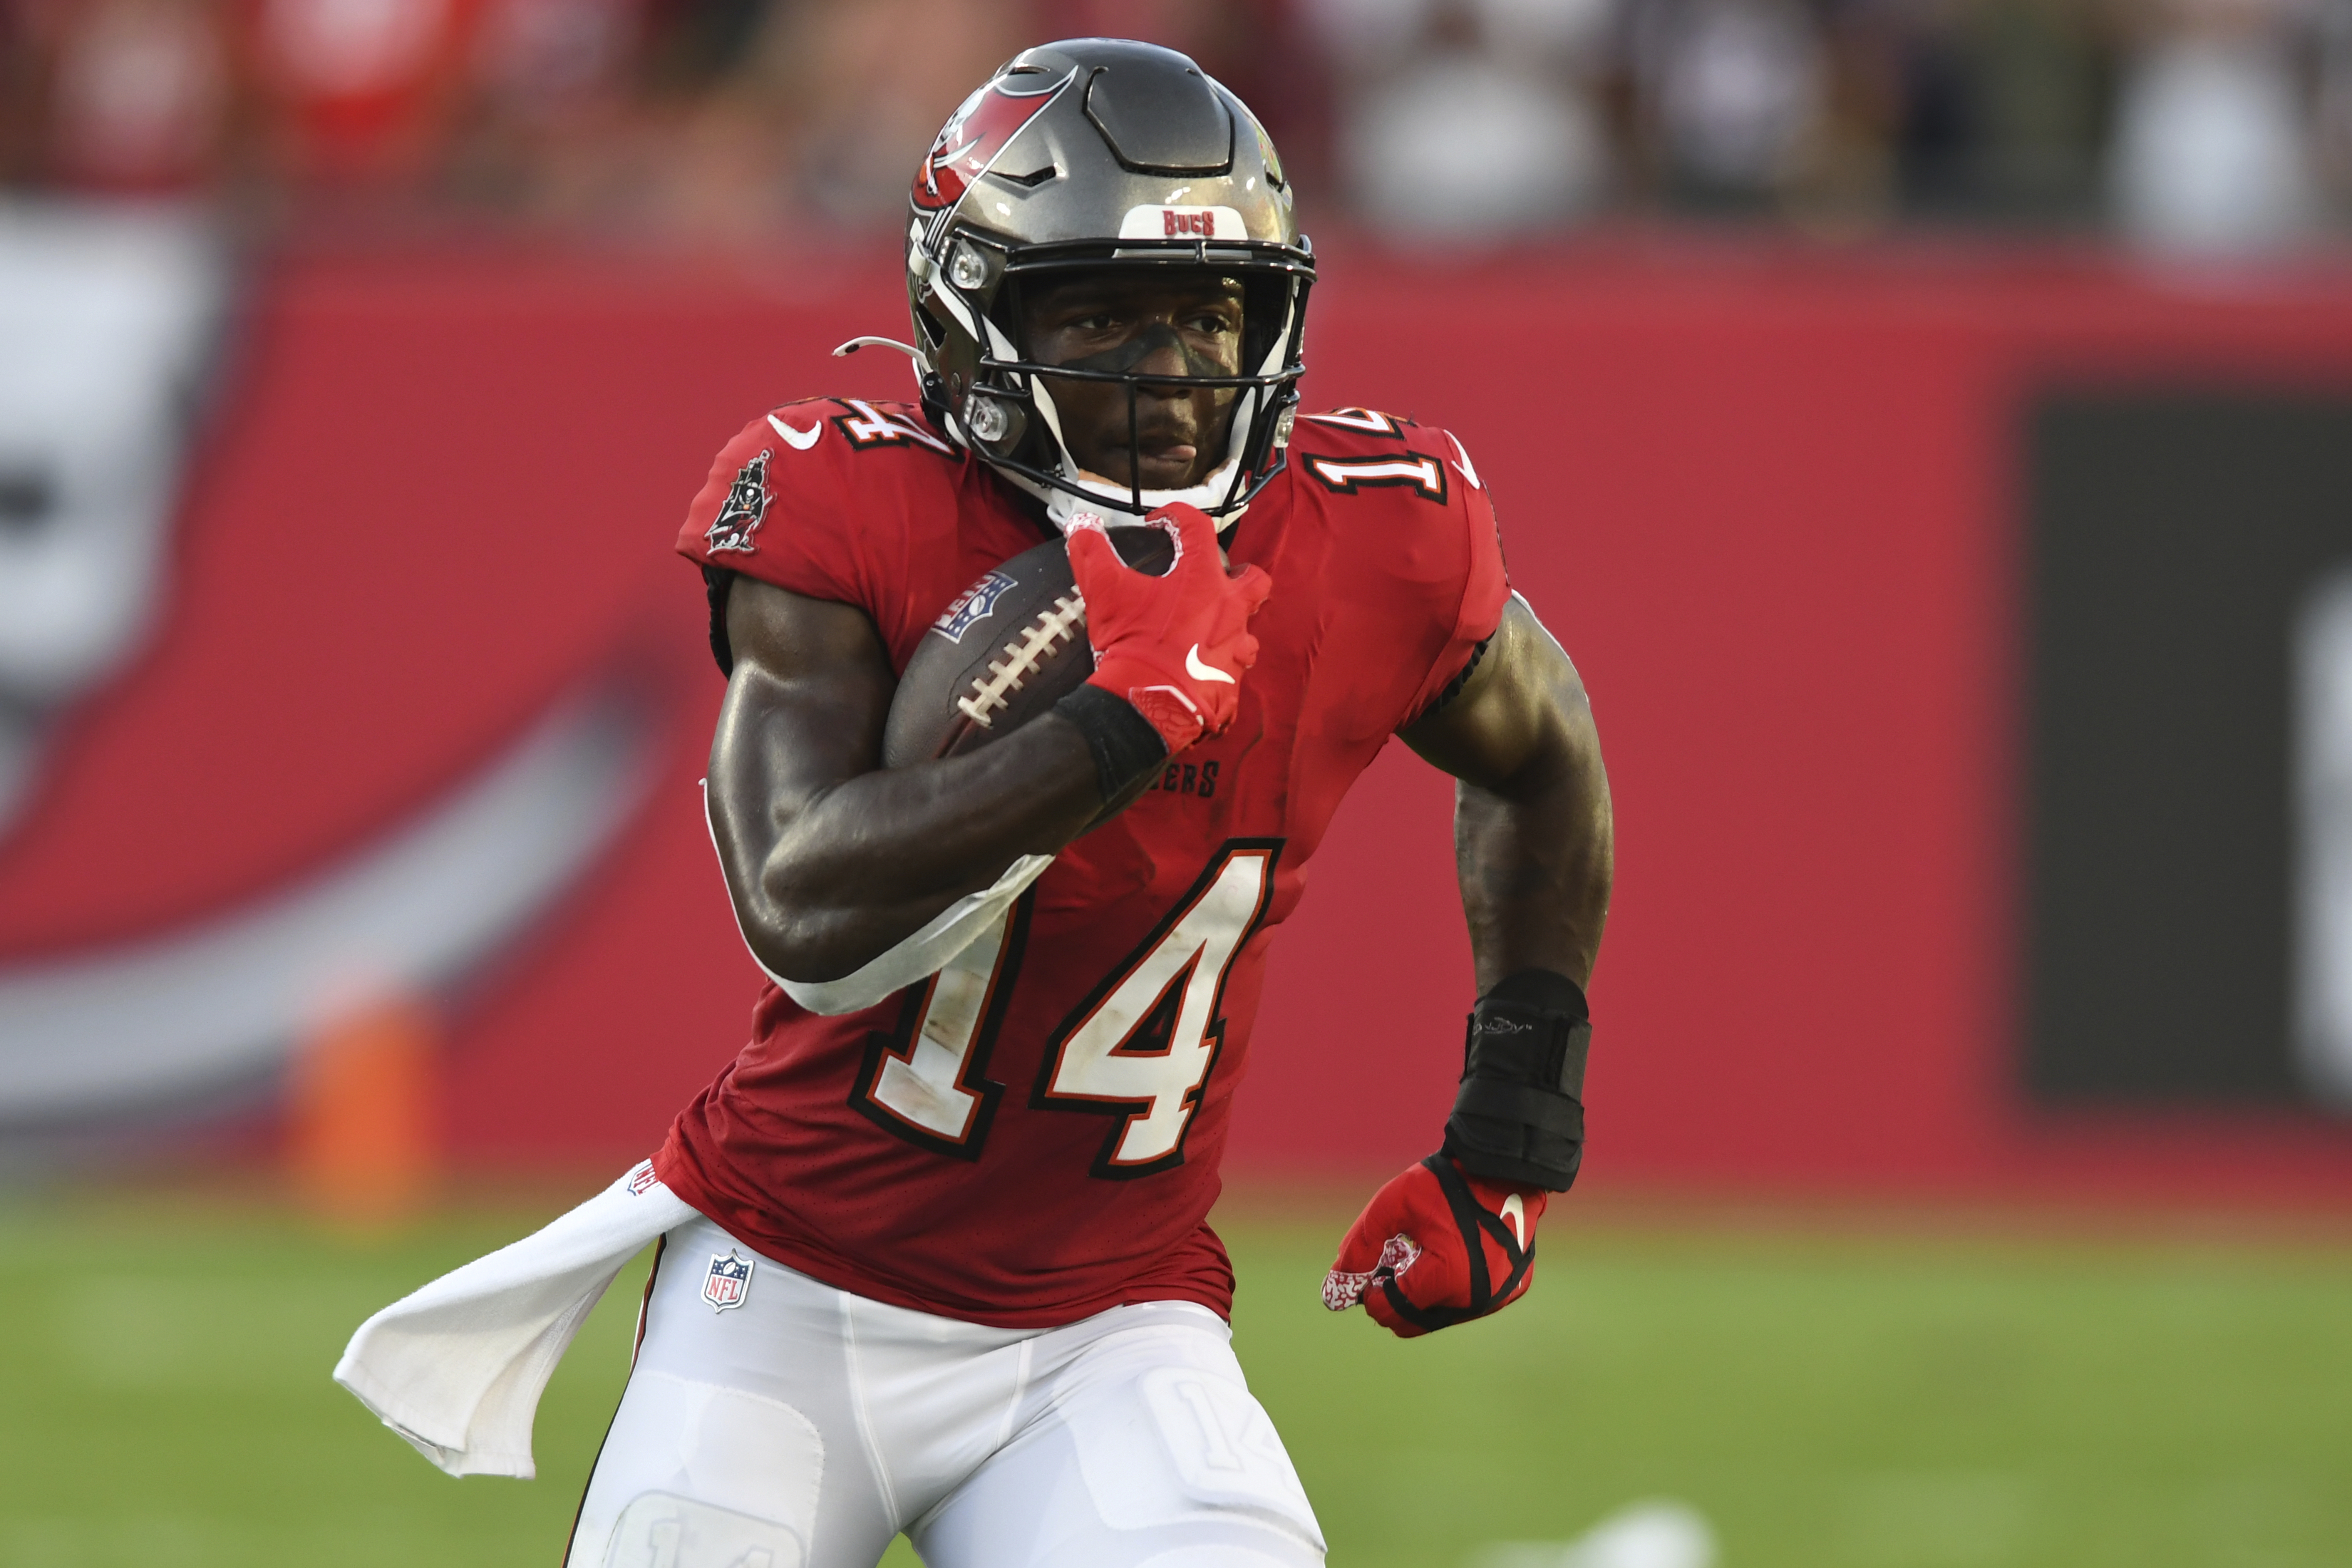 Bruce Arians: Bucs 'Really, Really Want' to Re-Sign Chris Godwin in Free Agency